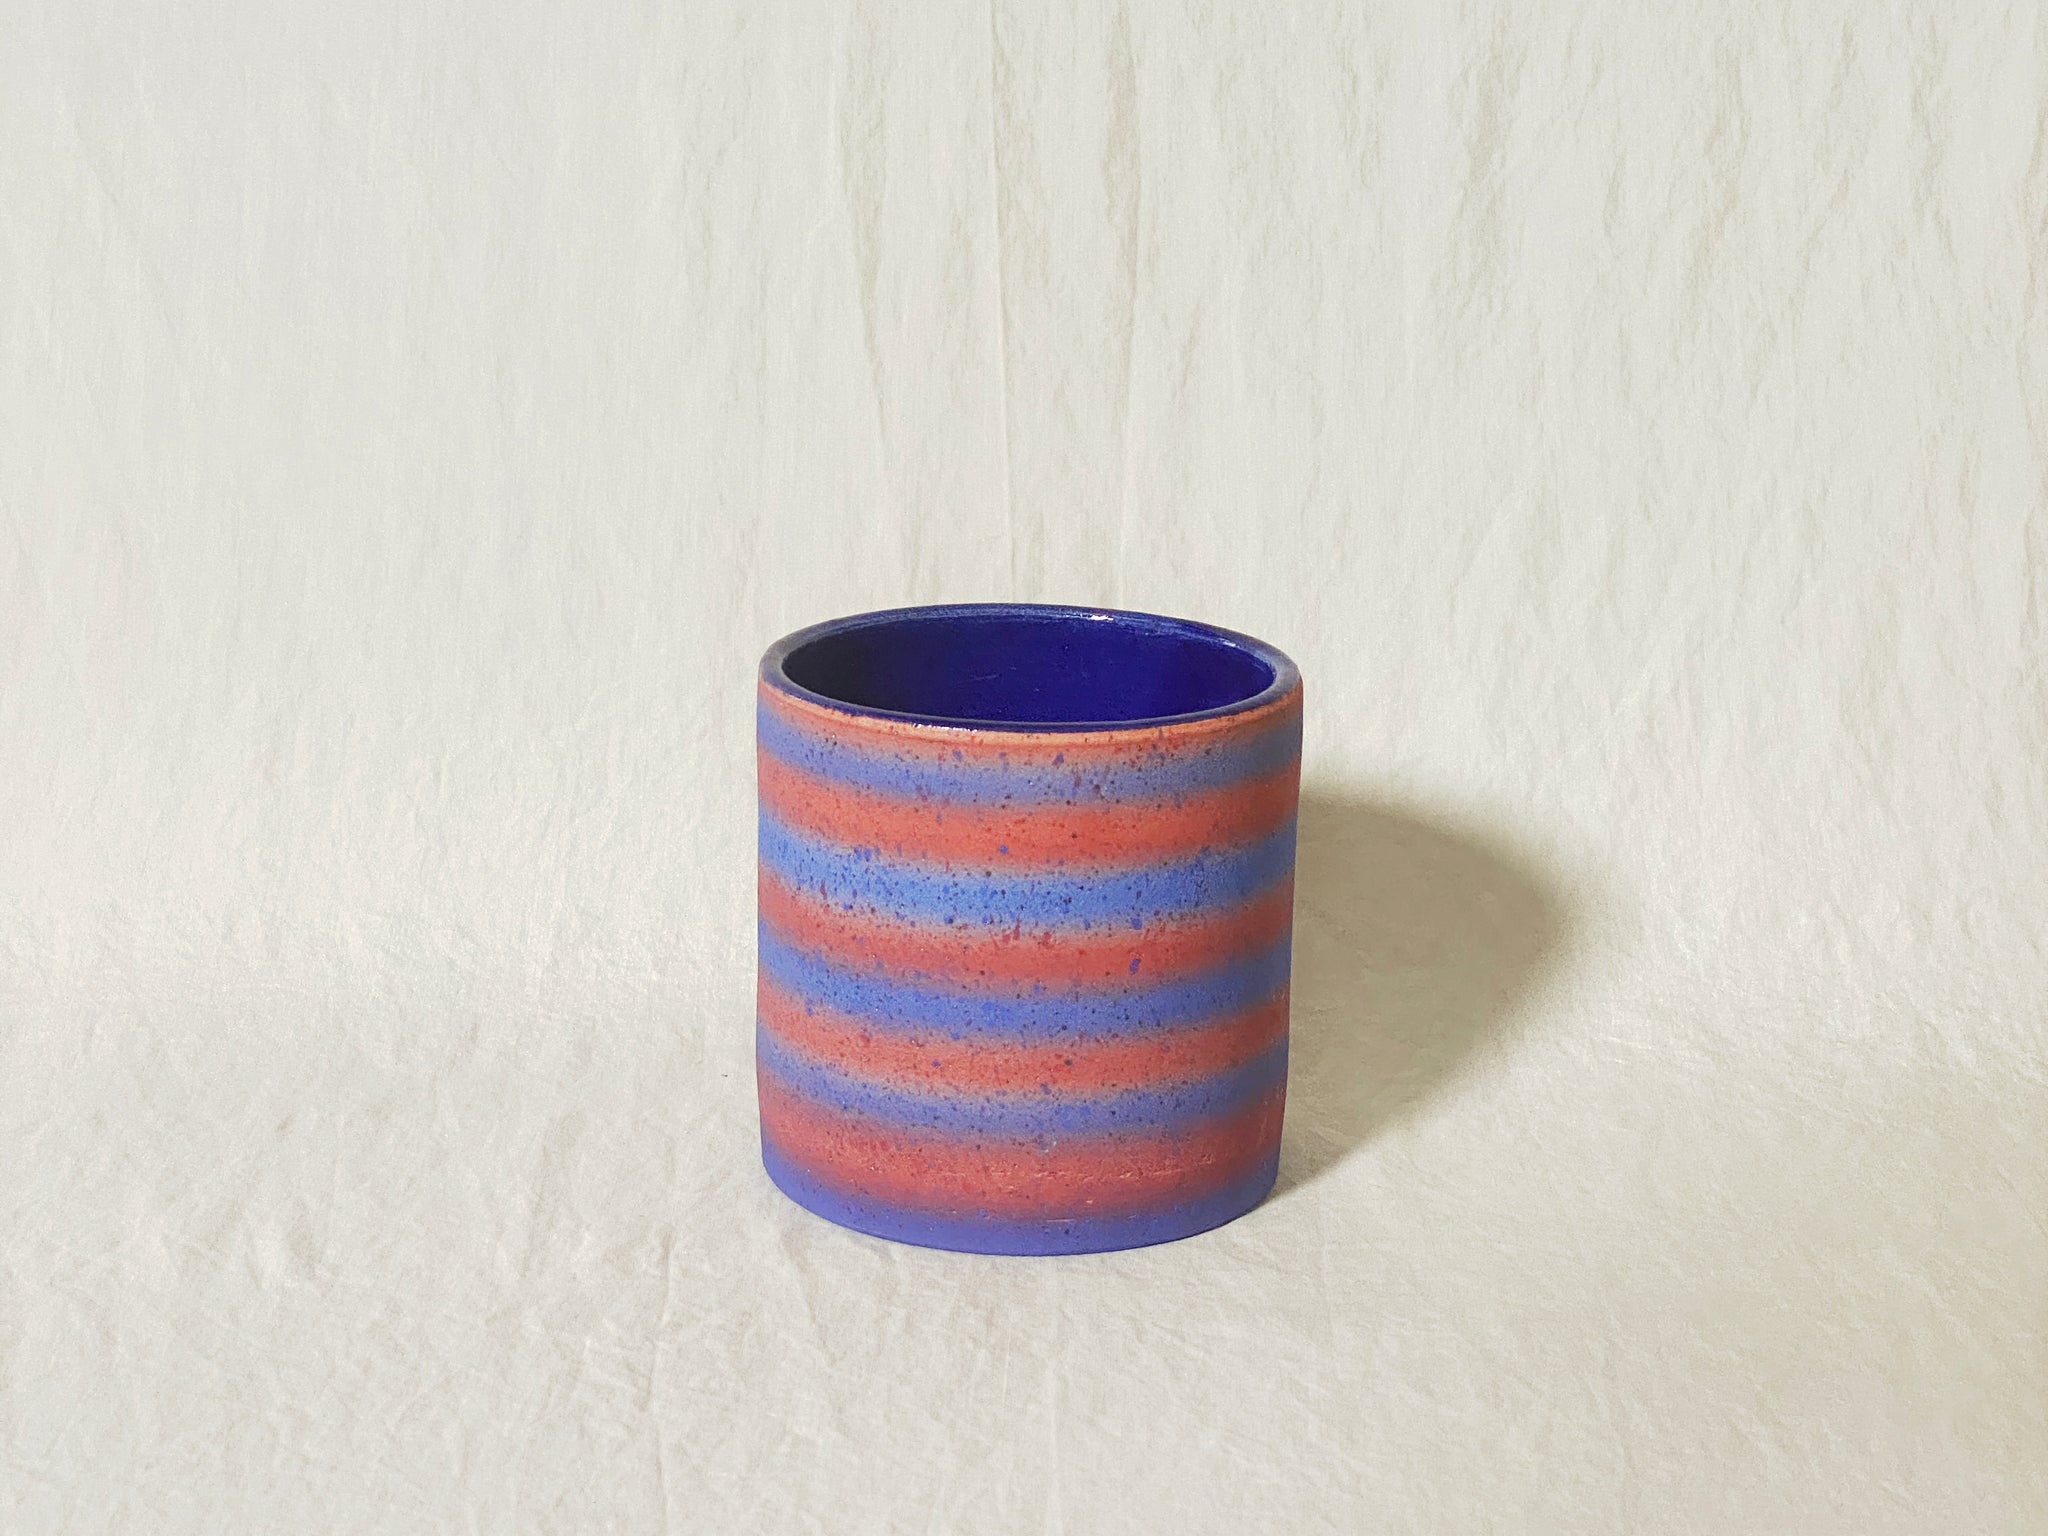 (SECOND) Blur Cup - Red and Blue